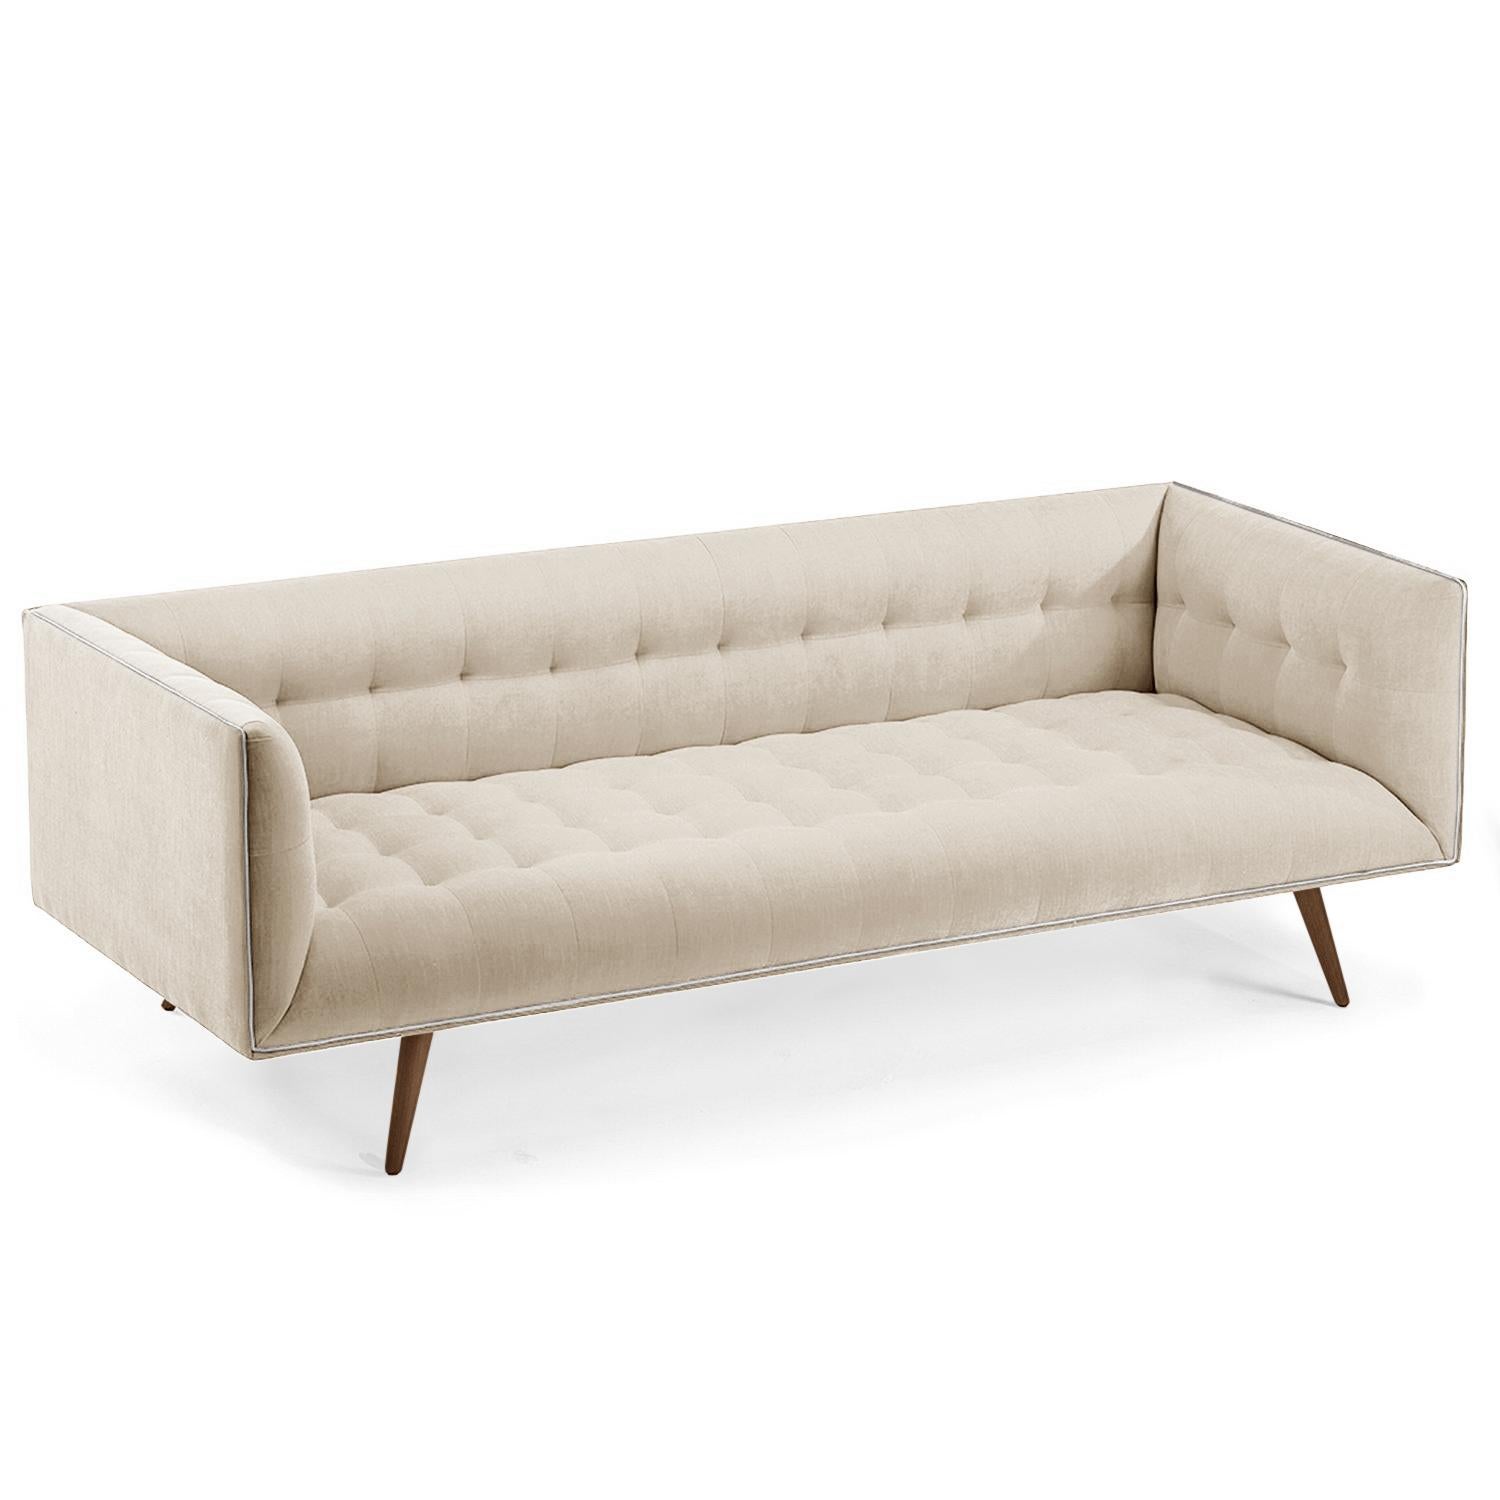 Portuguese Dust Sofa, Small with Beech Brown For Sale